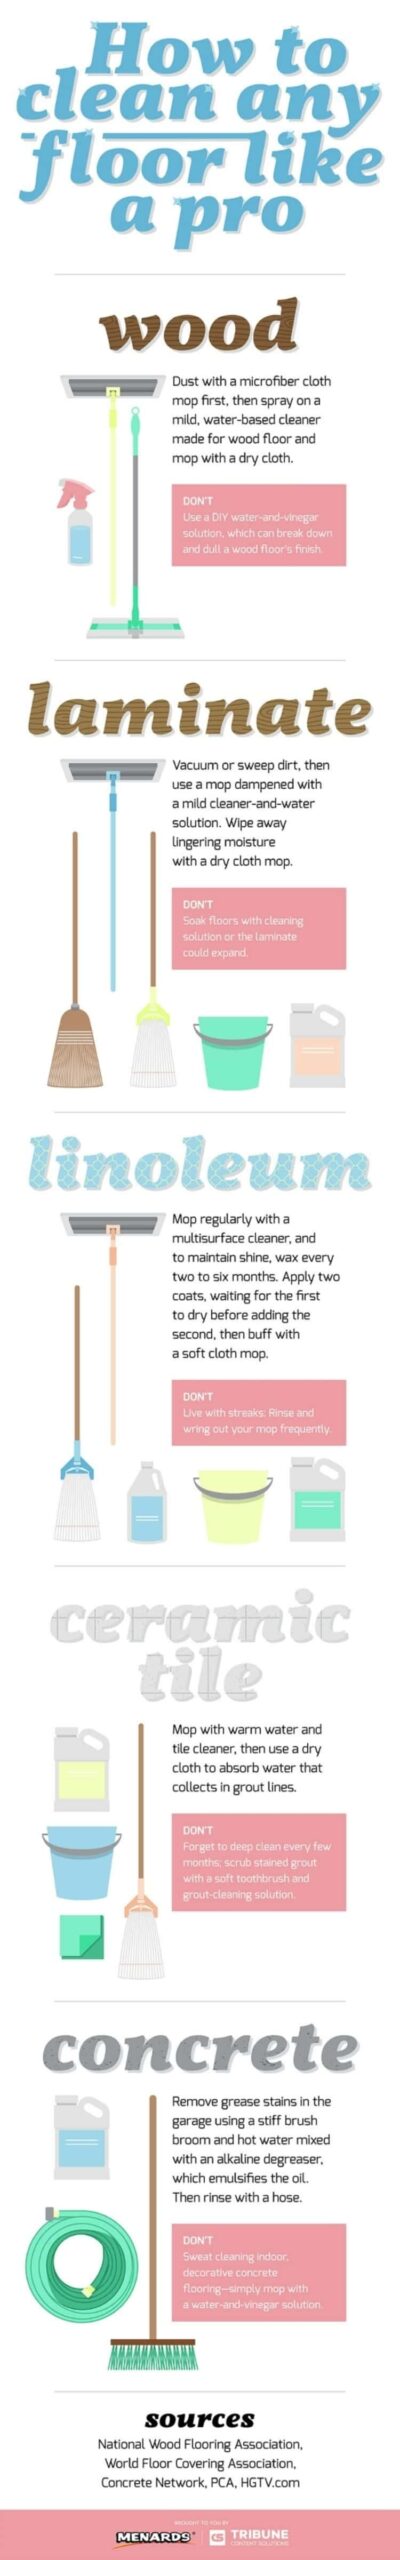 Infographic on How To Clean Any Floor Like A Pro 